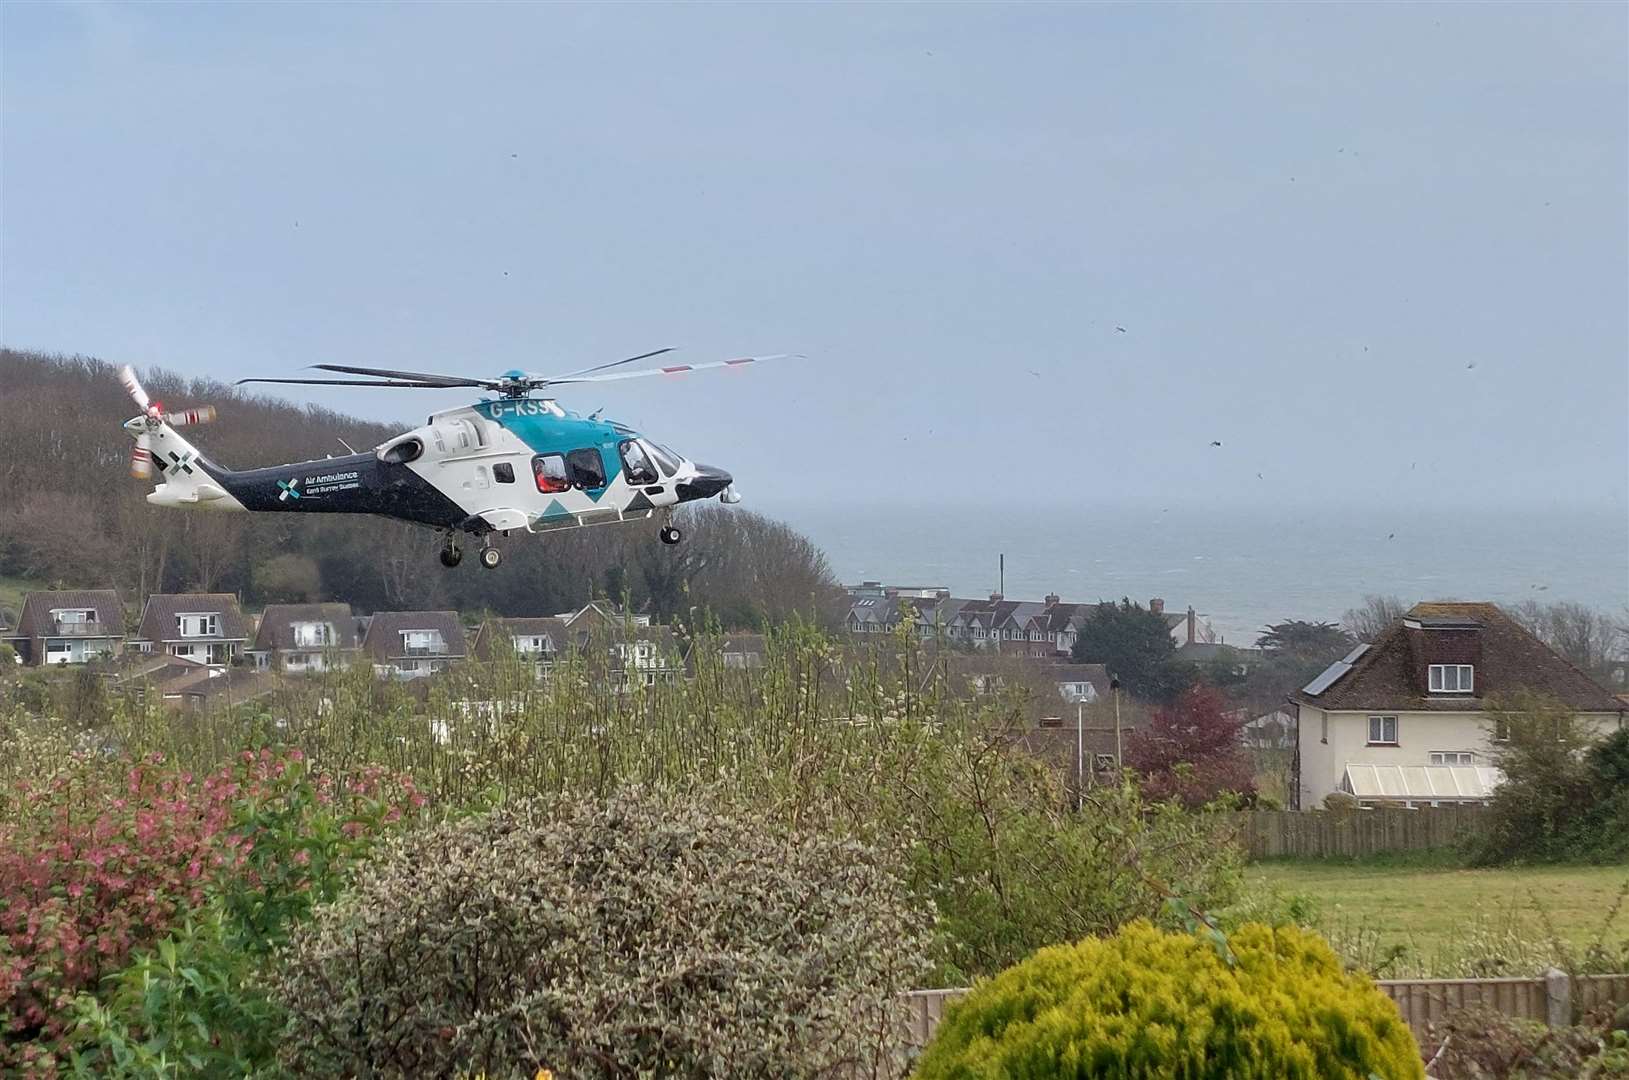 A cyclist has been taken to hospital by the air ambulance after falling off their bike while riding in woods near Shorncliffe Military Cemetery between Folkestone and Hythe. Picture: Frances Grellier